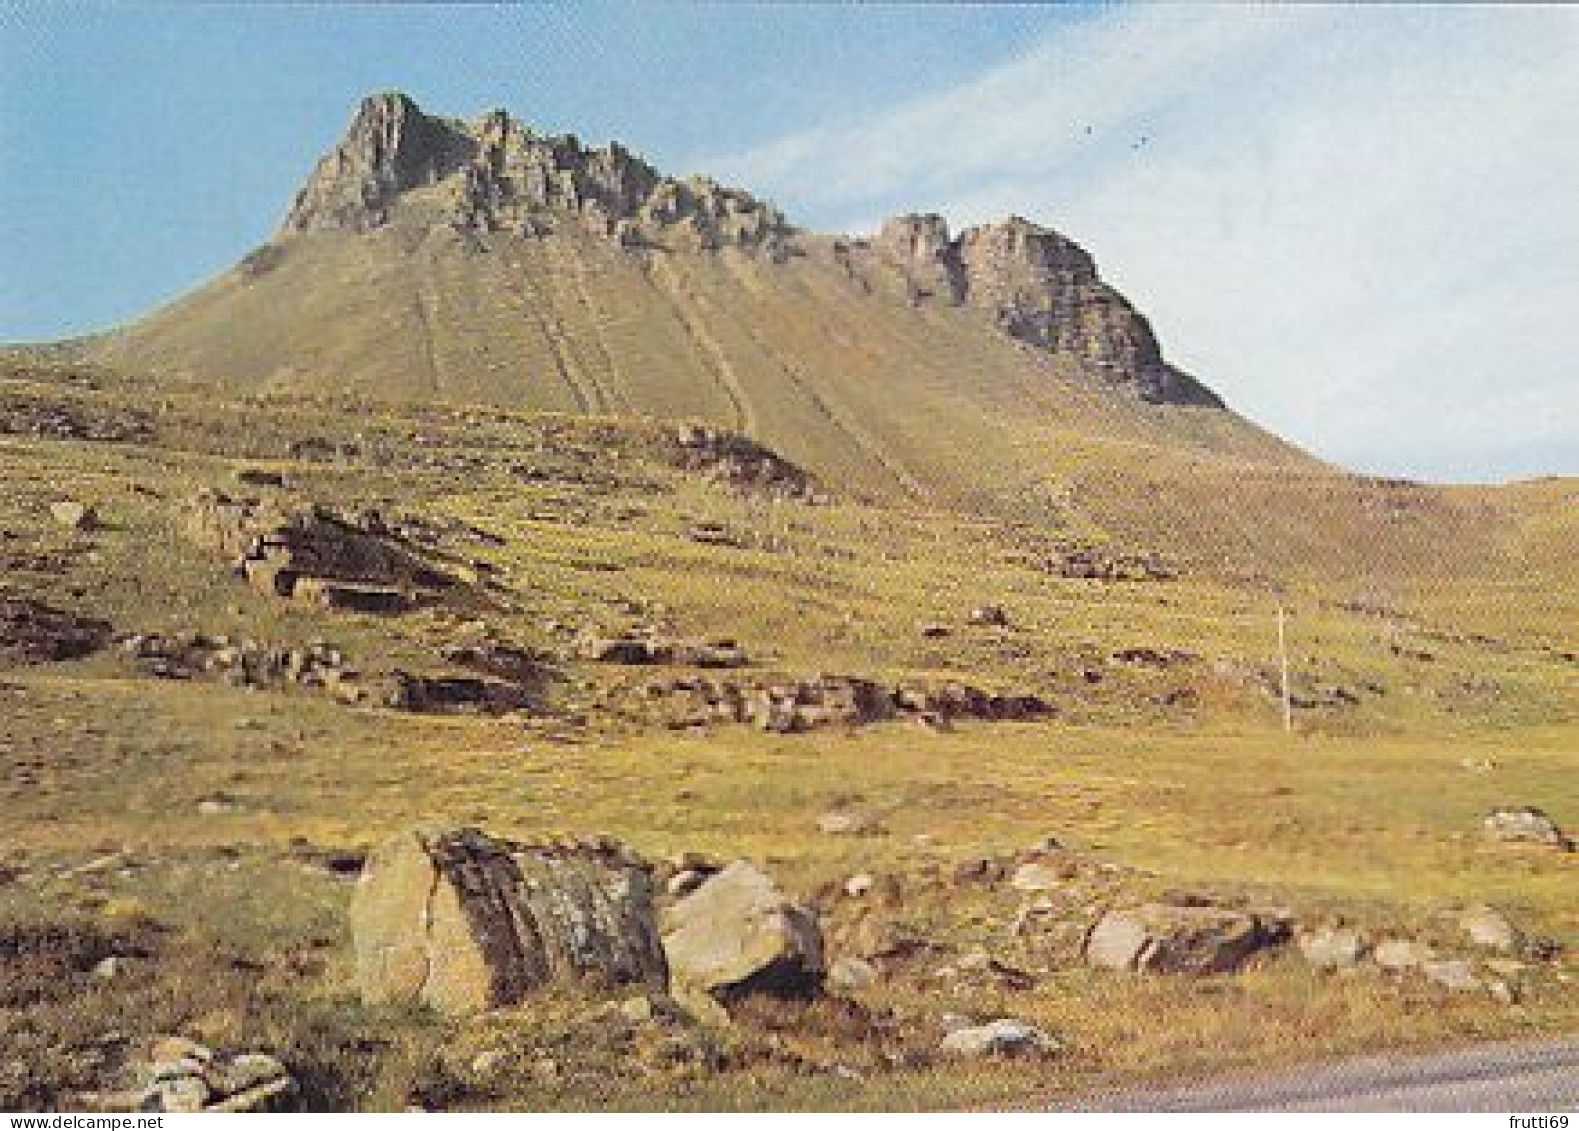 AK 173532 SCOTLAND -Ross-shire - Stac Polly Near Ullapool - Ross & Cromarty